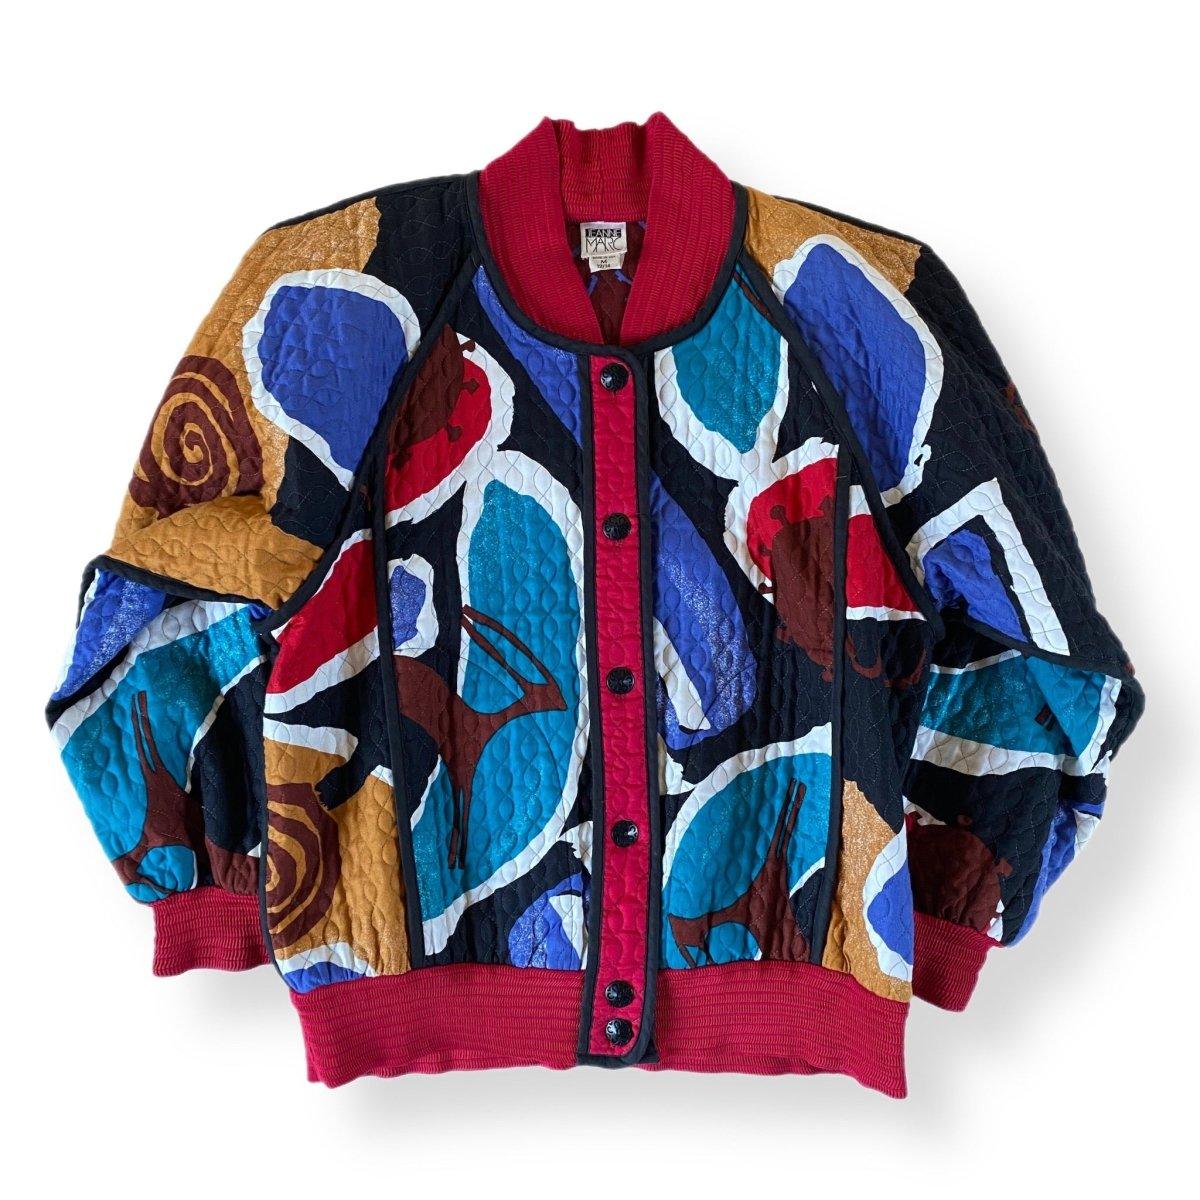 Jeanne Marc Quilted Jacket - Nataly Aponte